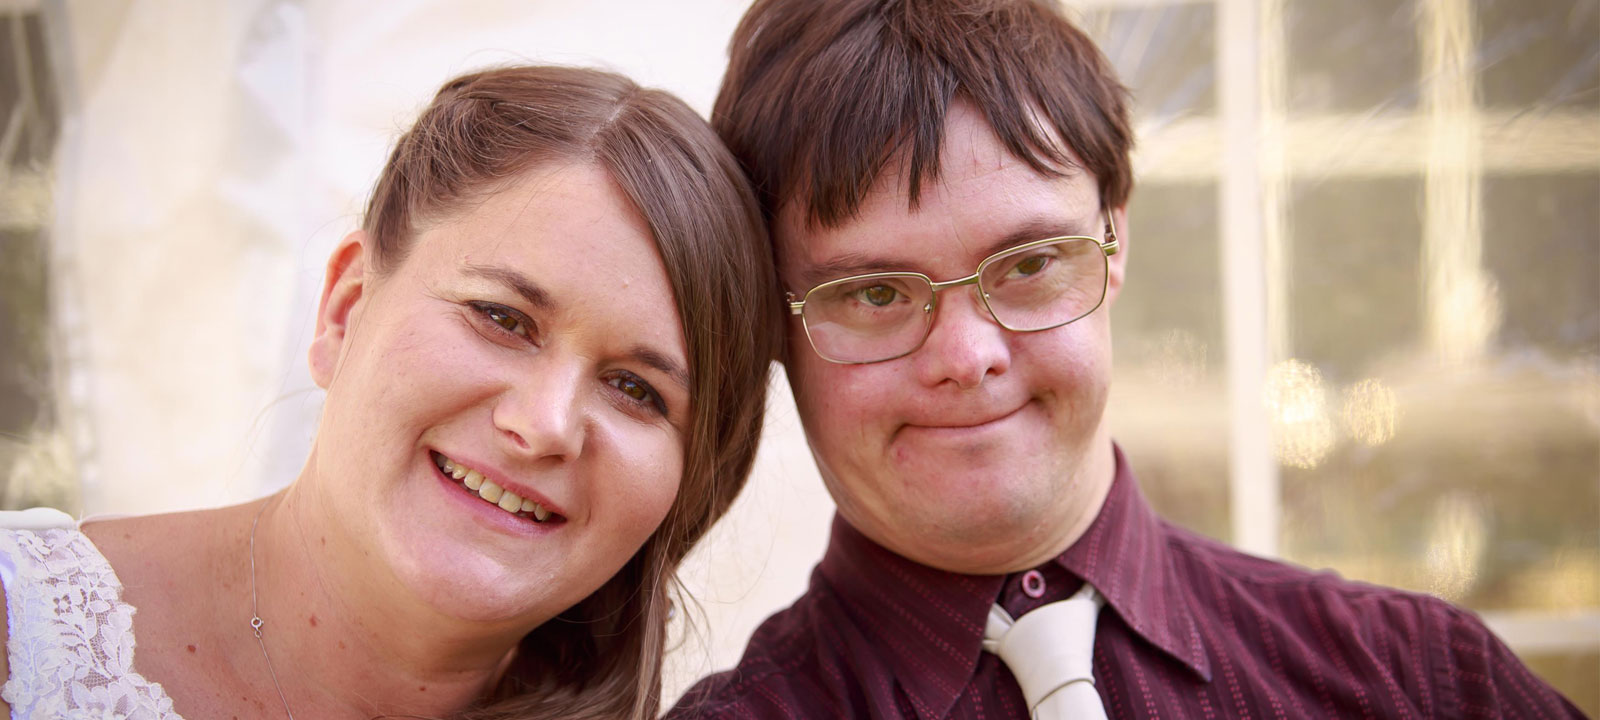 Down Syndrome Awareness Week – Julia and Tom’s Story